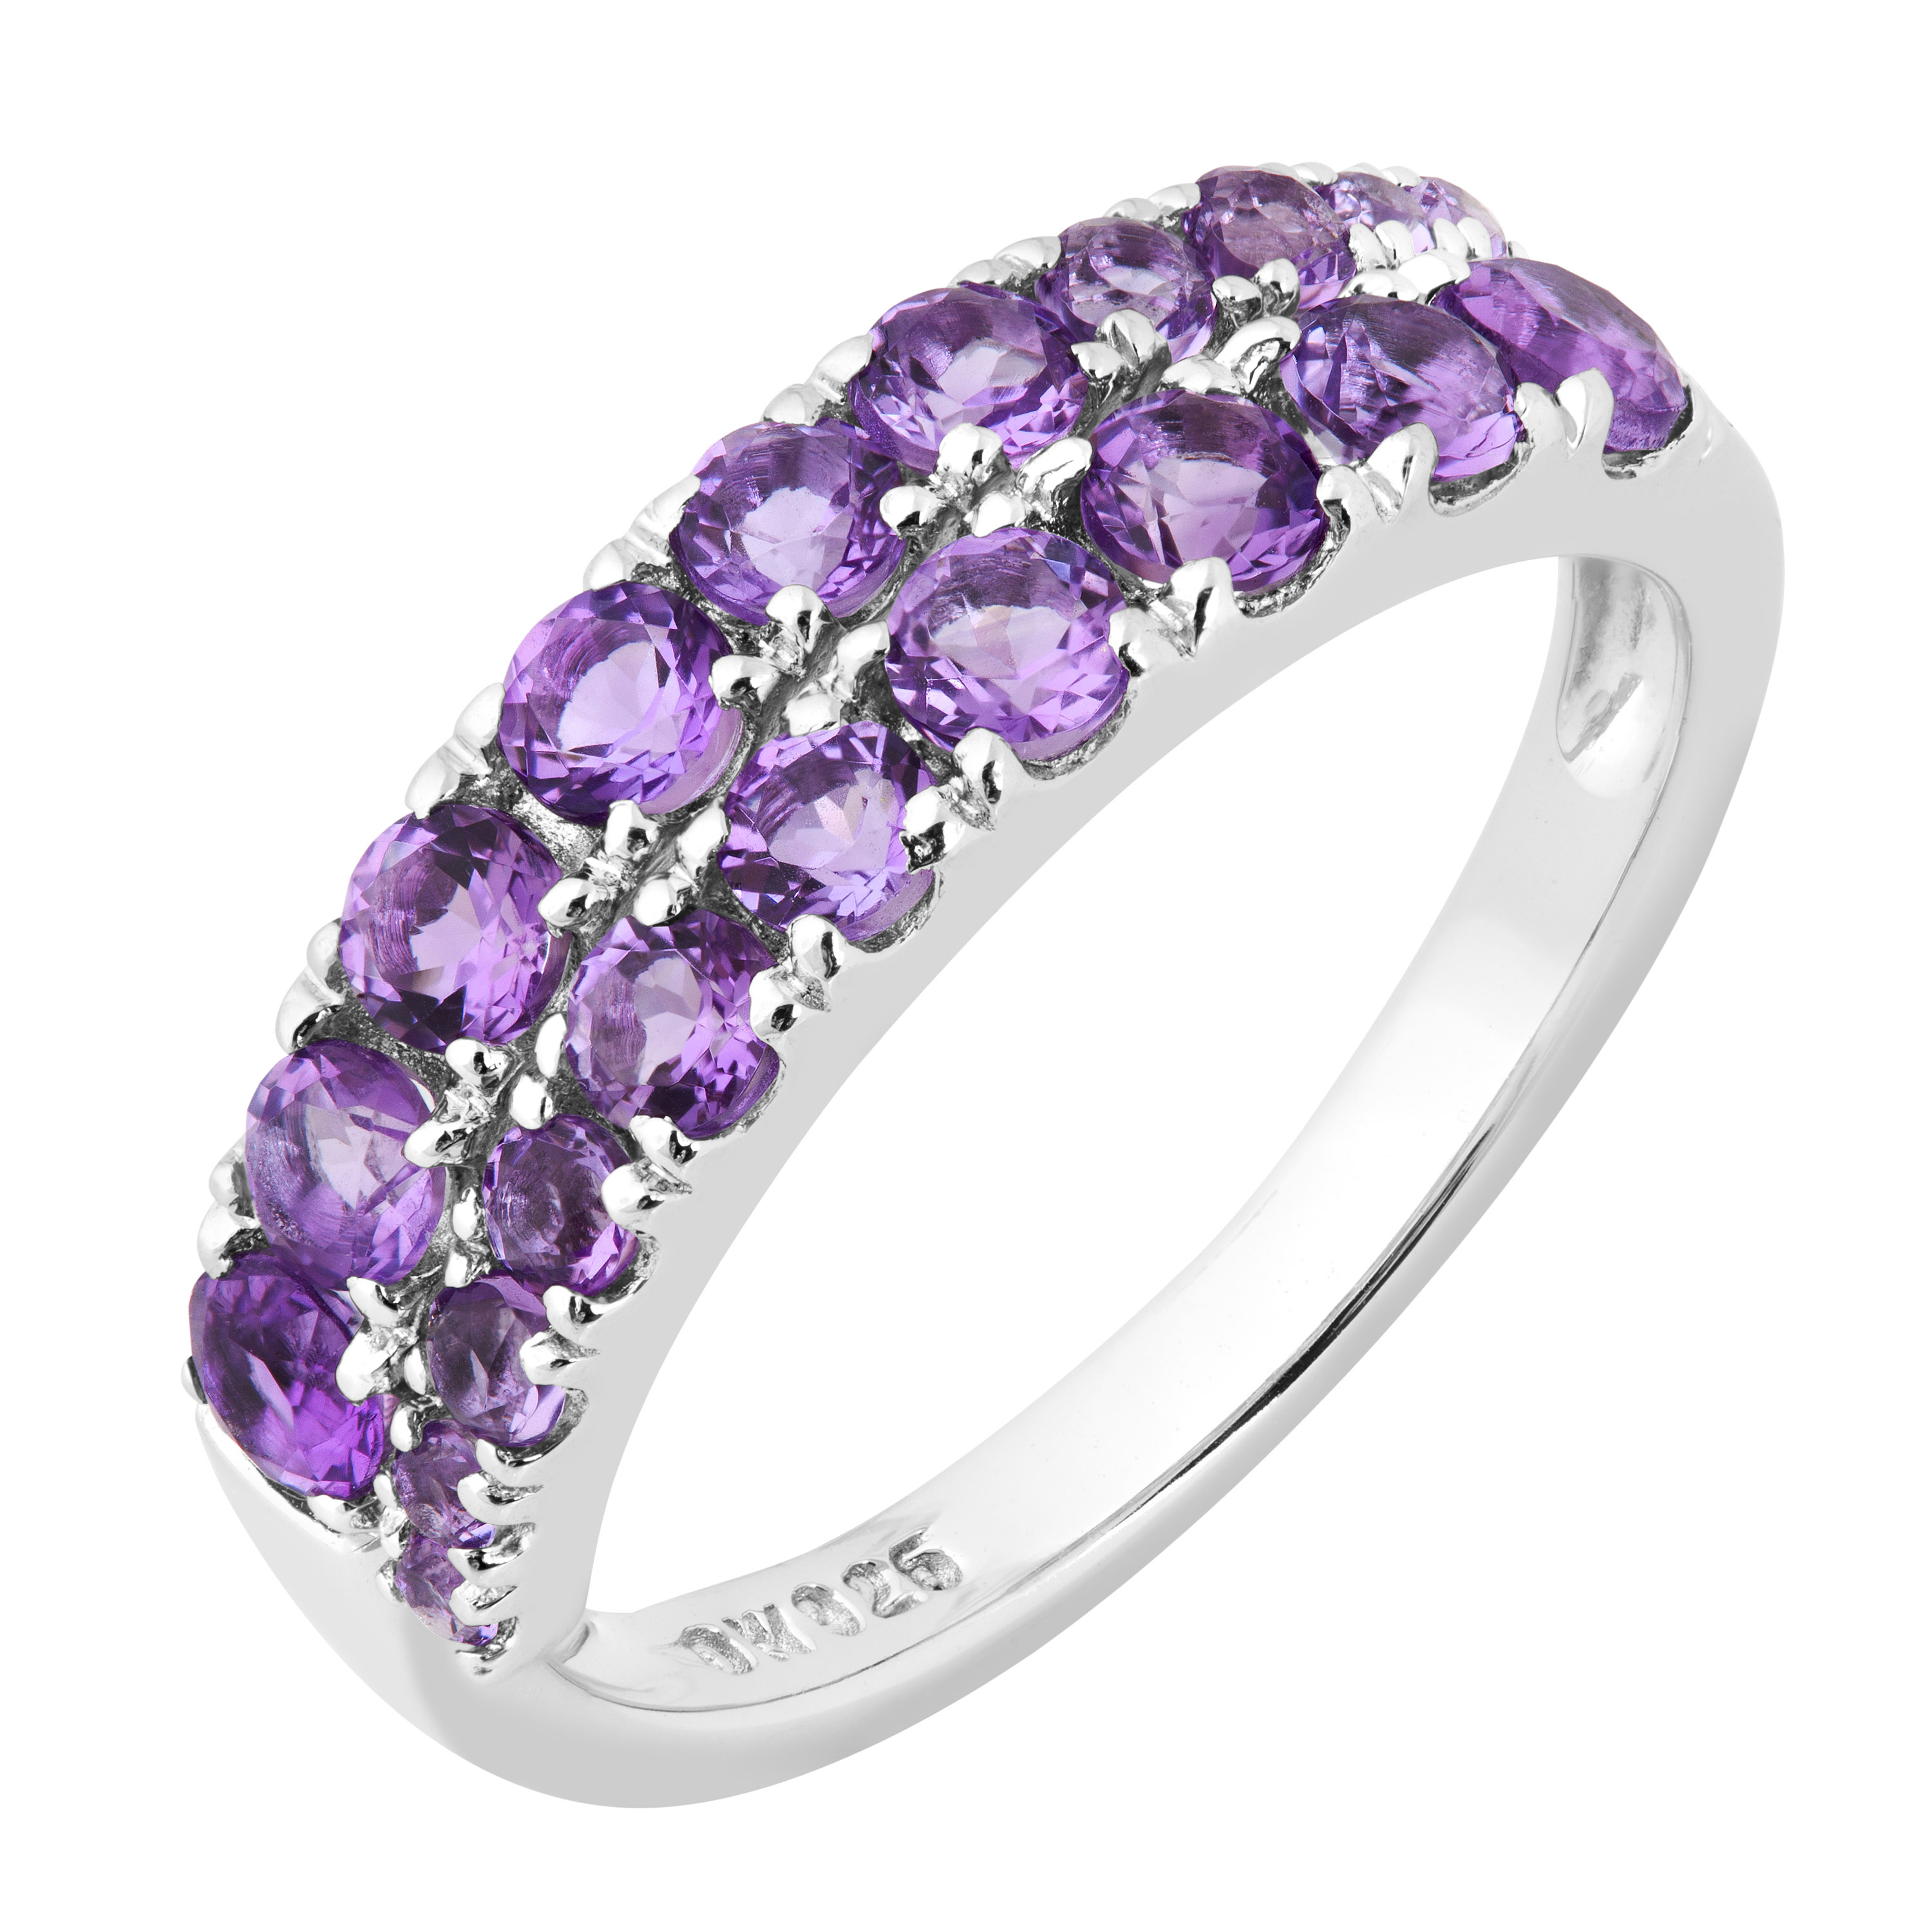 Brazillian Amethyst Twisted Ring, Rhodium Plated Sterling Silver